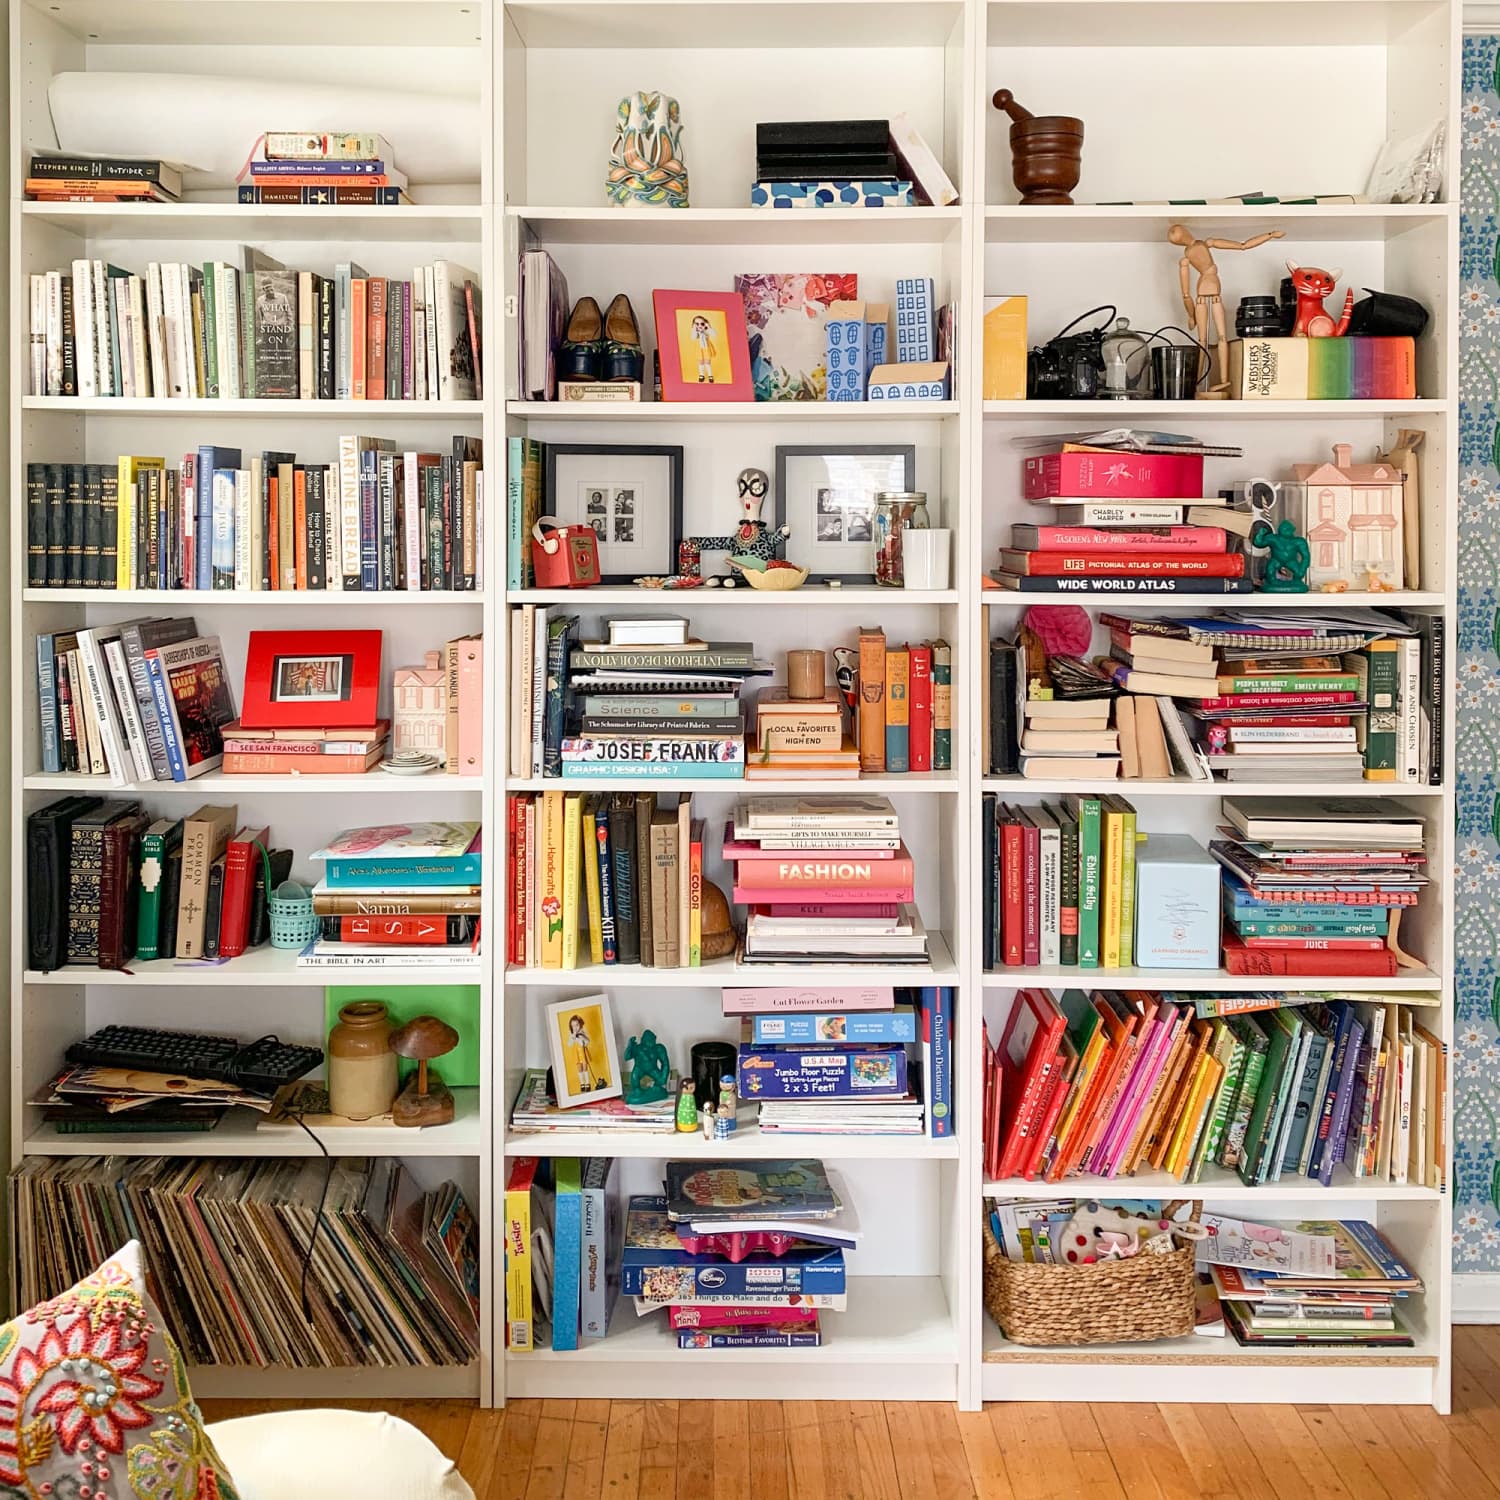 An Under $100 IKEA Bookcase Makeover that Looks Like a Built-In